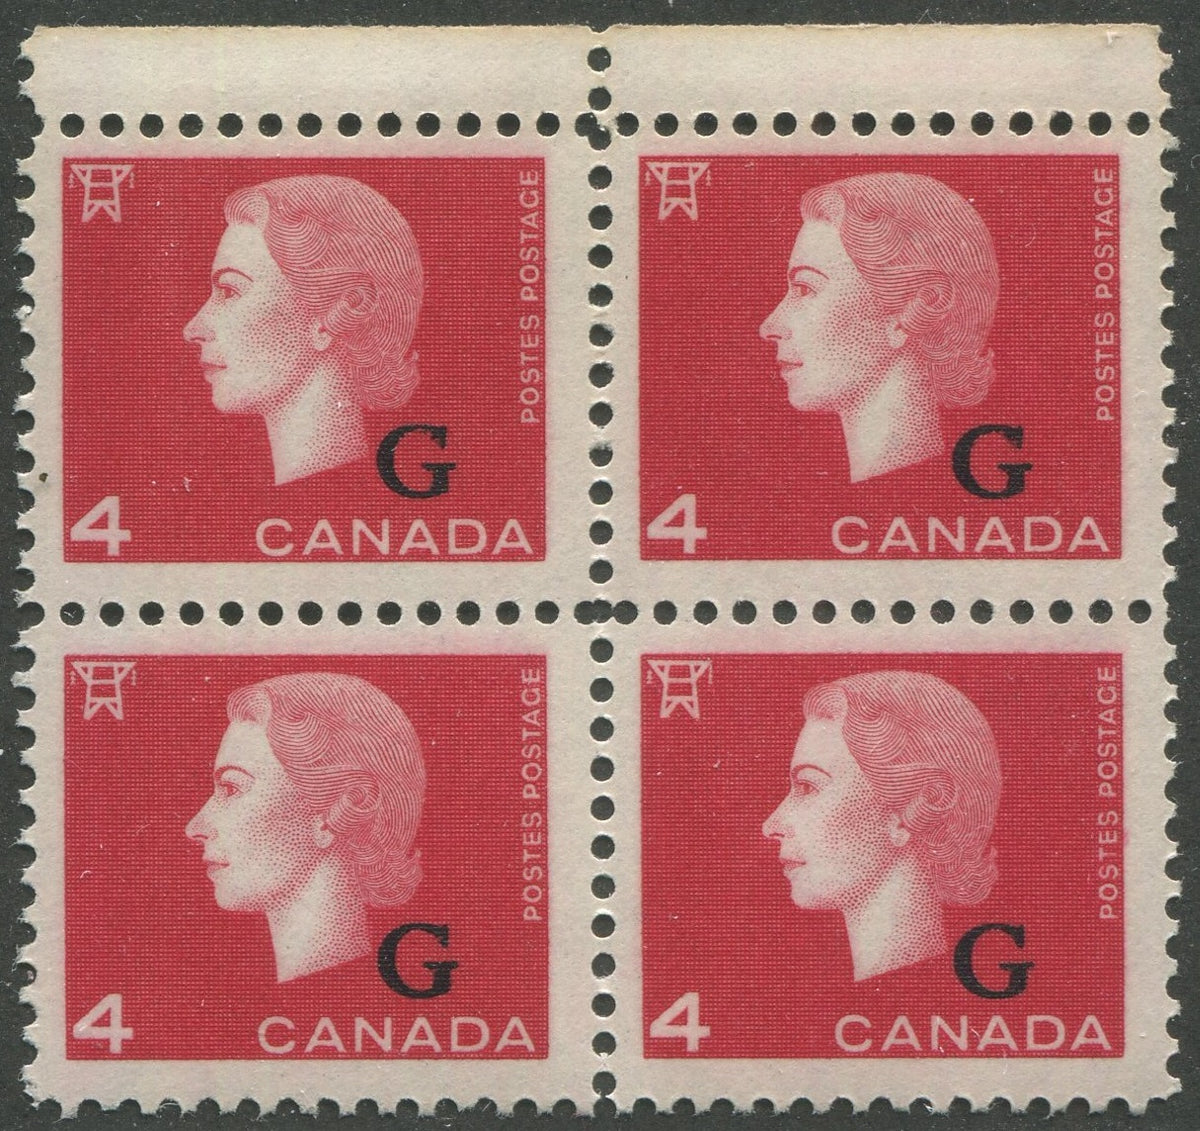 0396CA2212 - Canada O48 - Mint Block of 4, Unlisted Offset